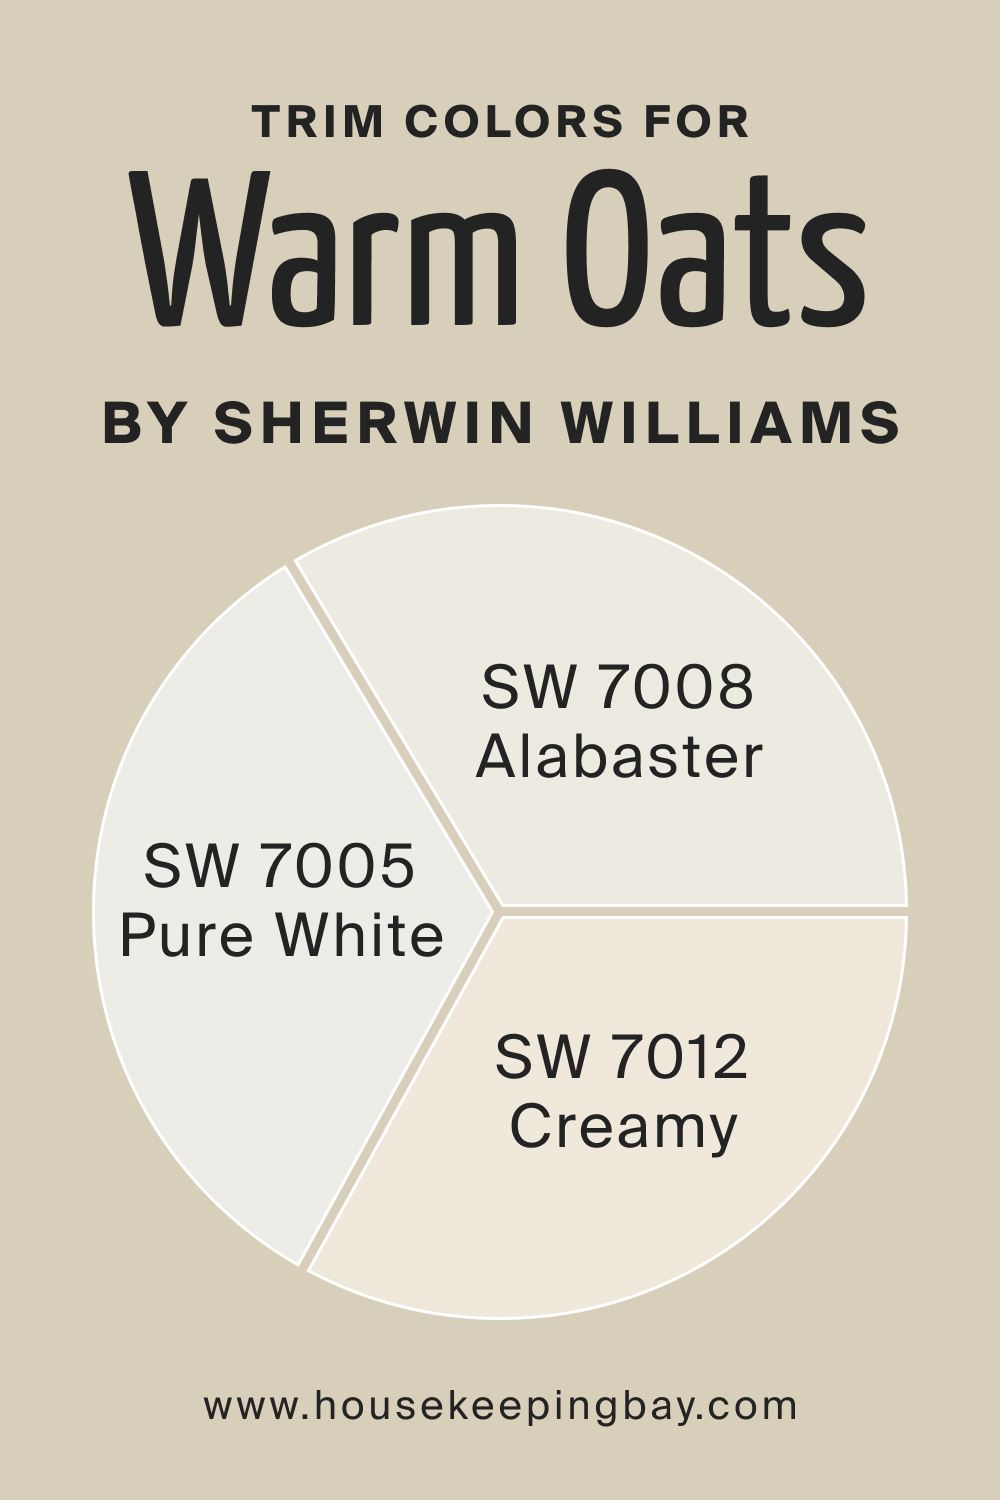 Trim Colors of SW 9511 Warm Oats by Sherwin Williams